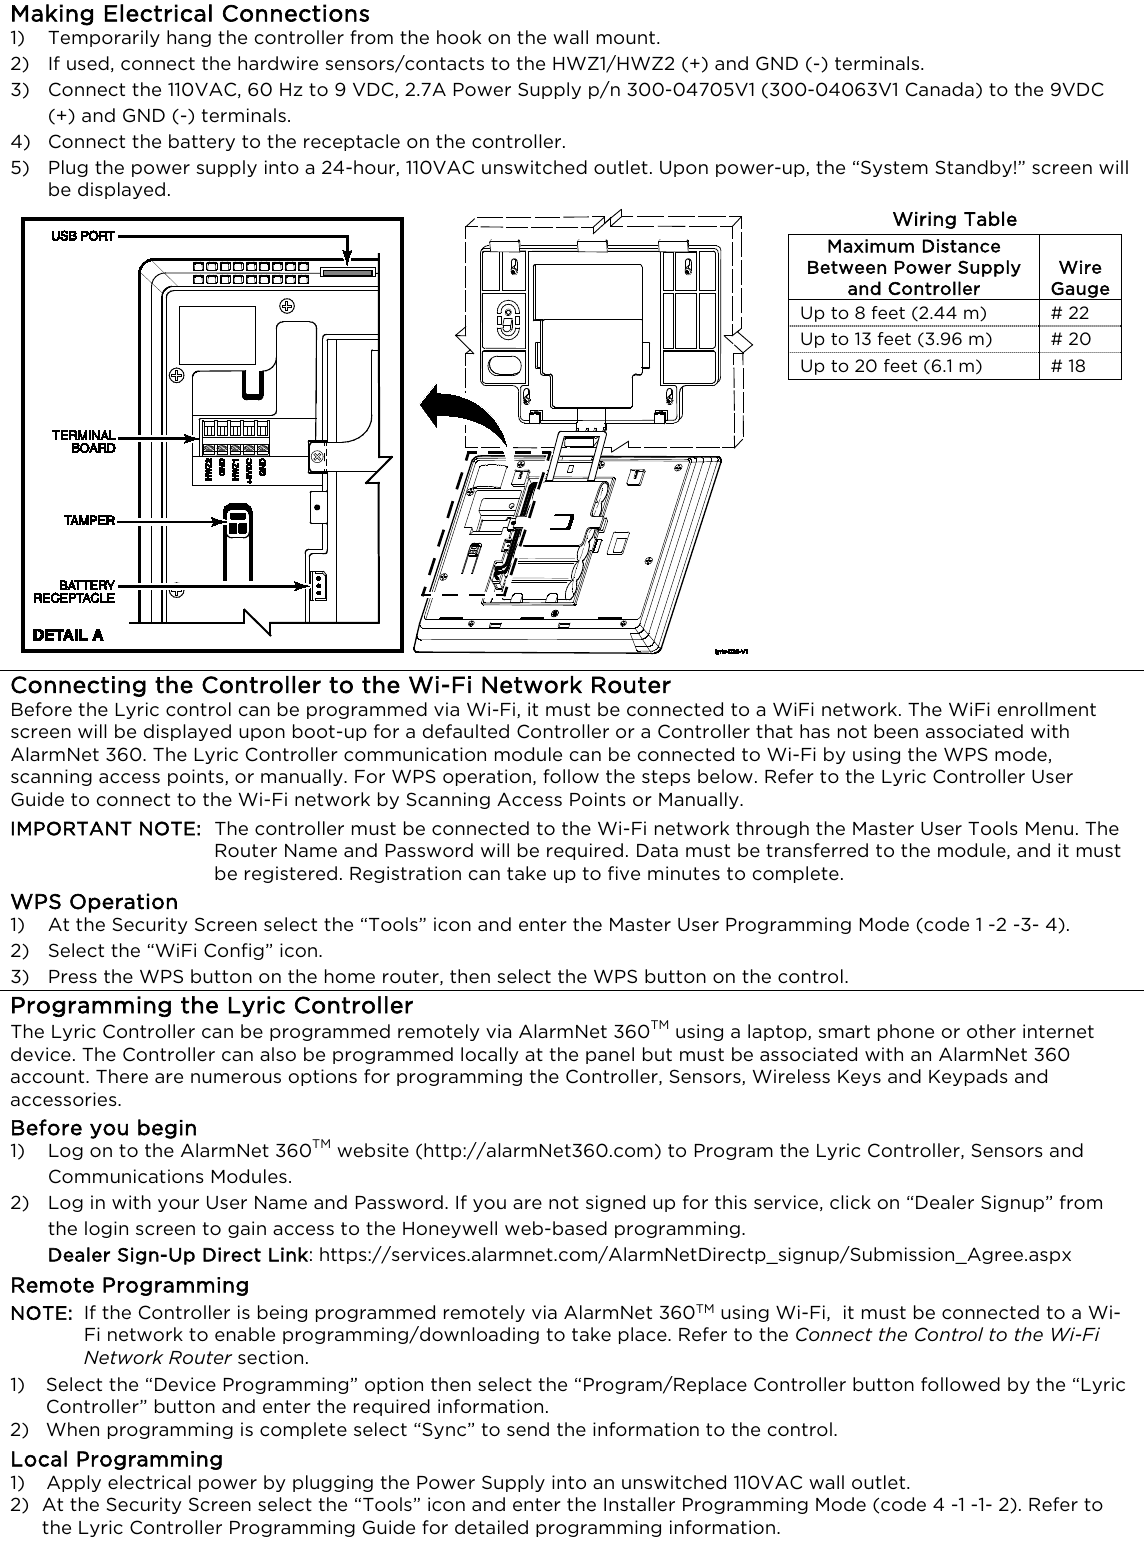 Page 2 of 4 - Installing The ADT QuickConnect Kit  B01J72OKAC Honeywell Lyric Z-Wave Controller LCP500-L Quick Install Guide